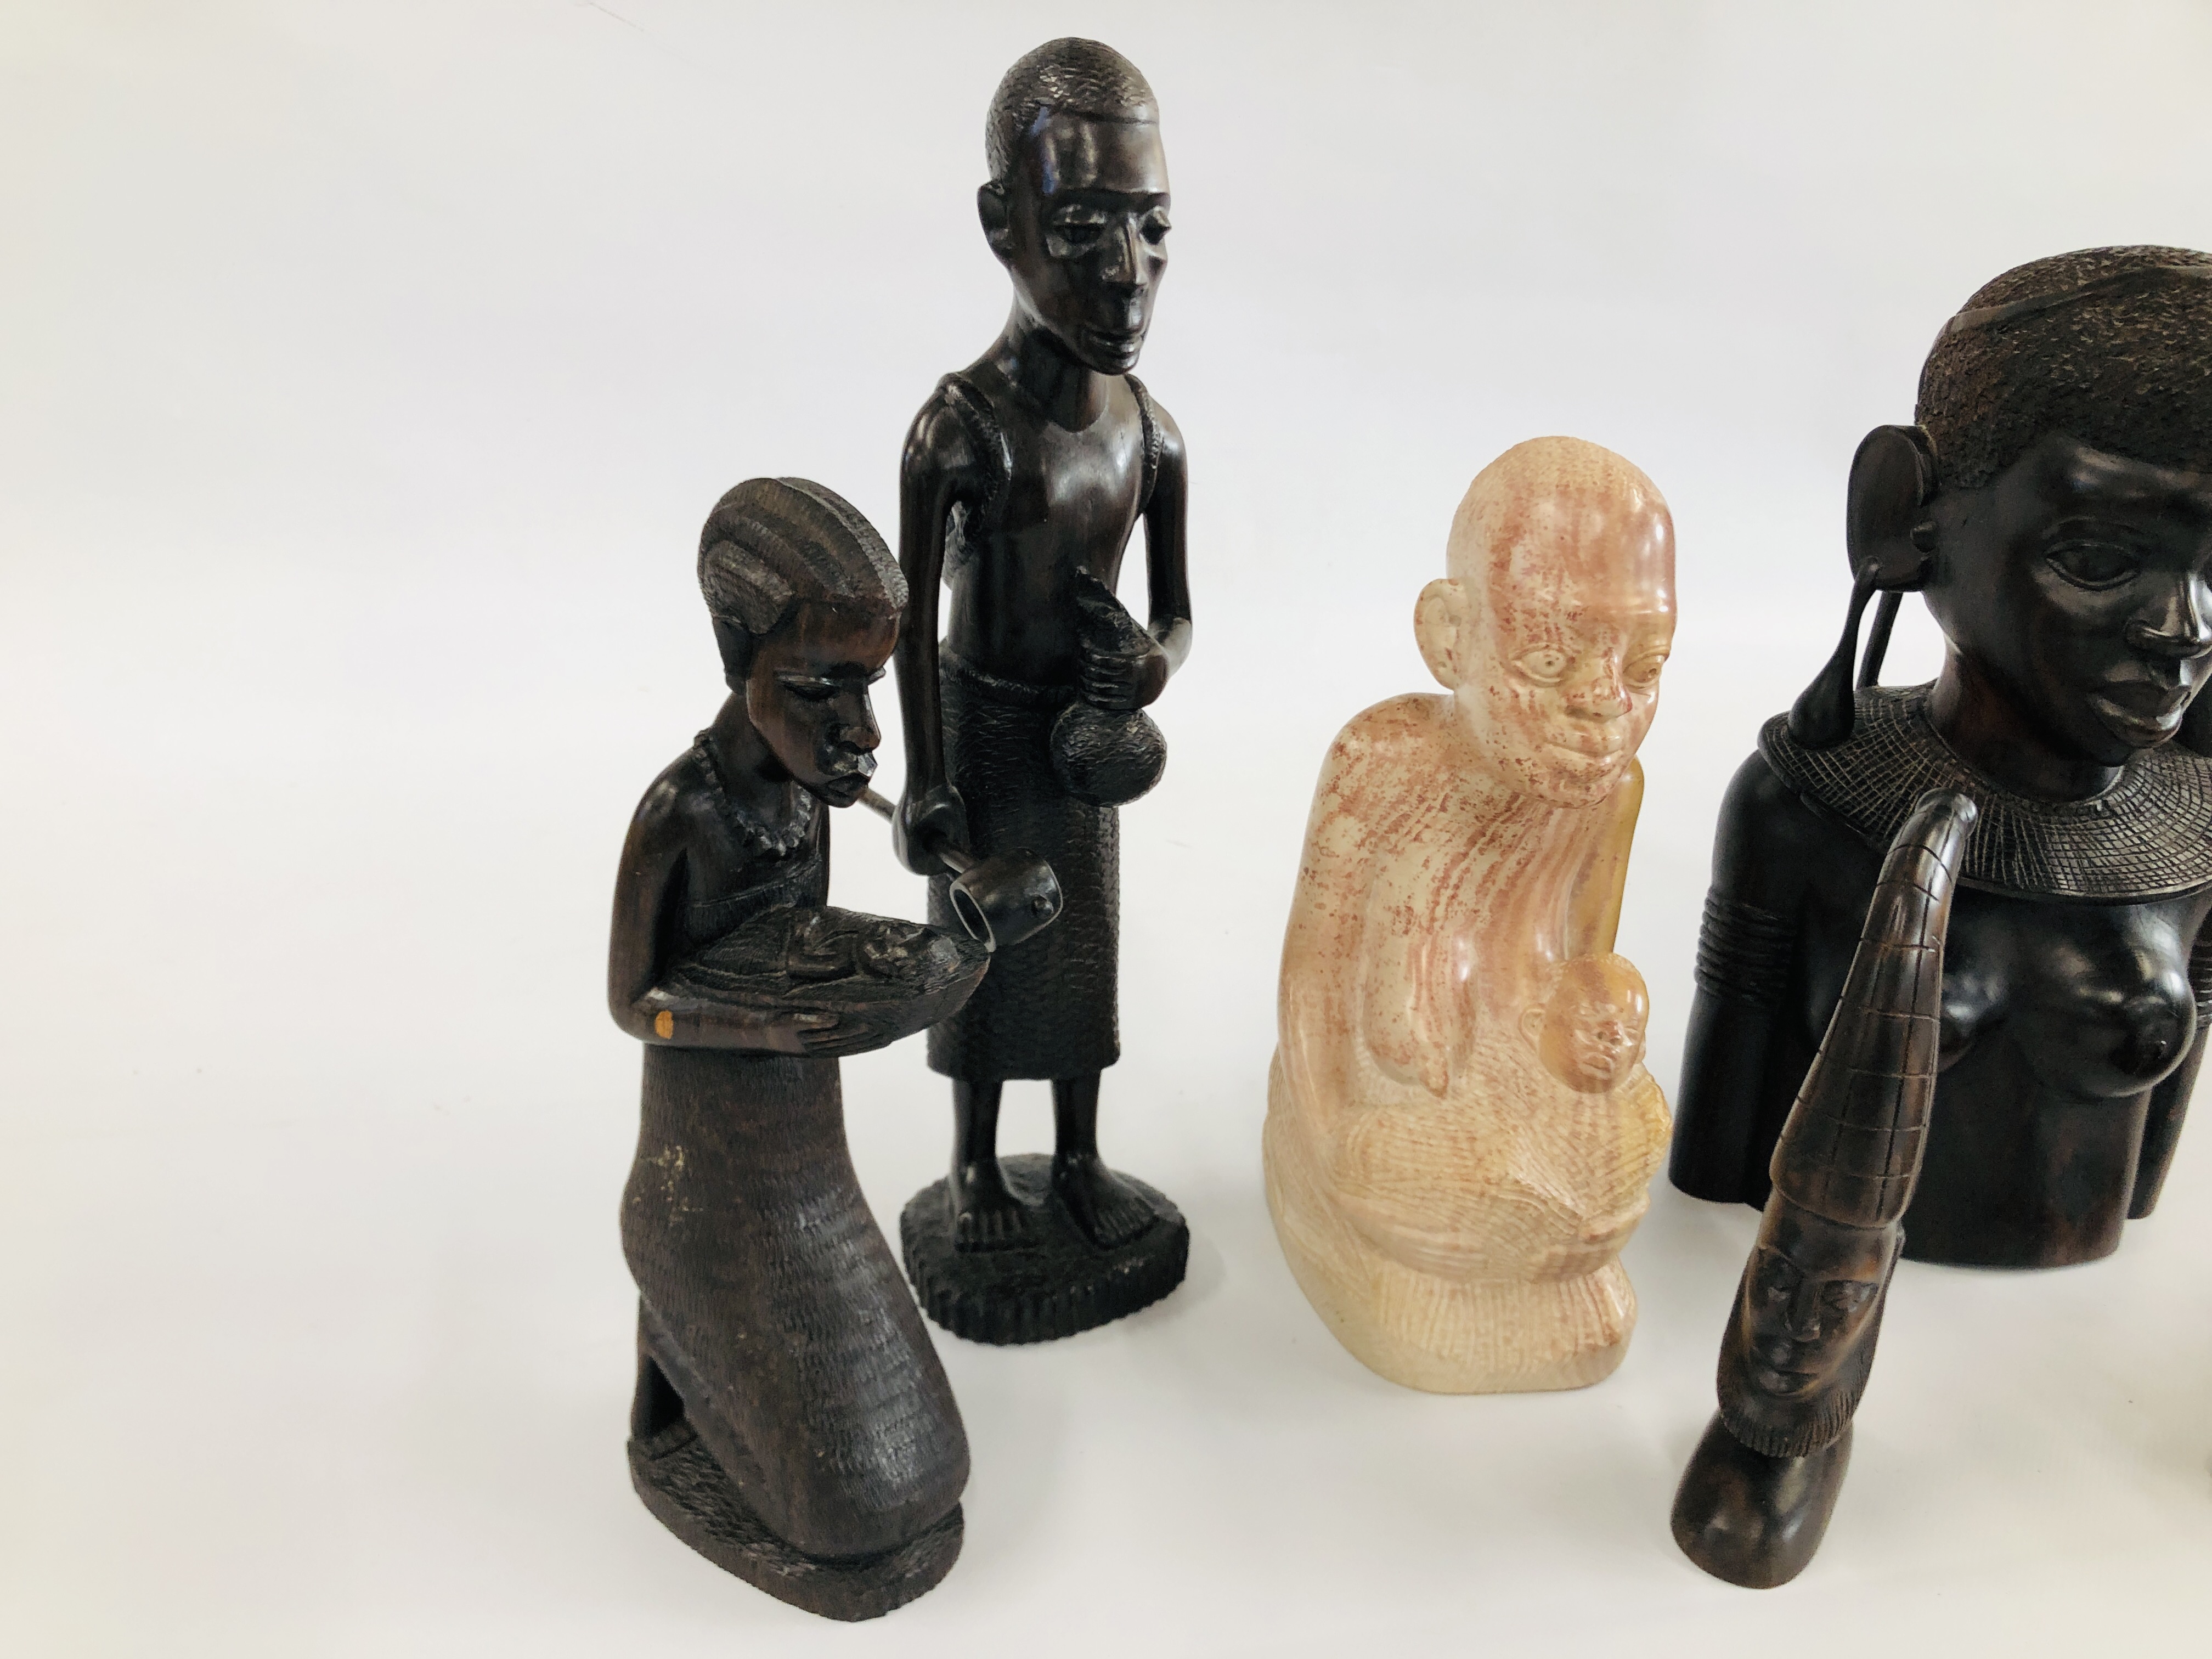 A HARD WOOD AFRICAN TRIBAL BUST ALONG WITH A FURTHER TWO FIGURES ONE OF WHICH IS HOLDING A NEW BORN - Image 5 of 5